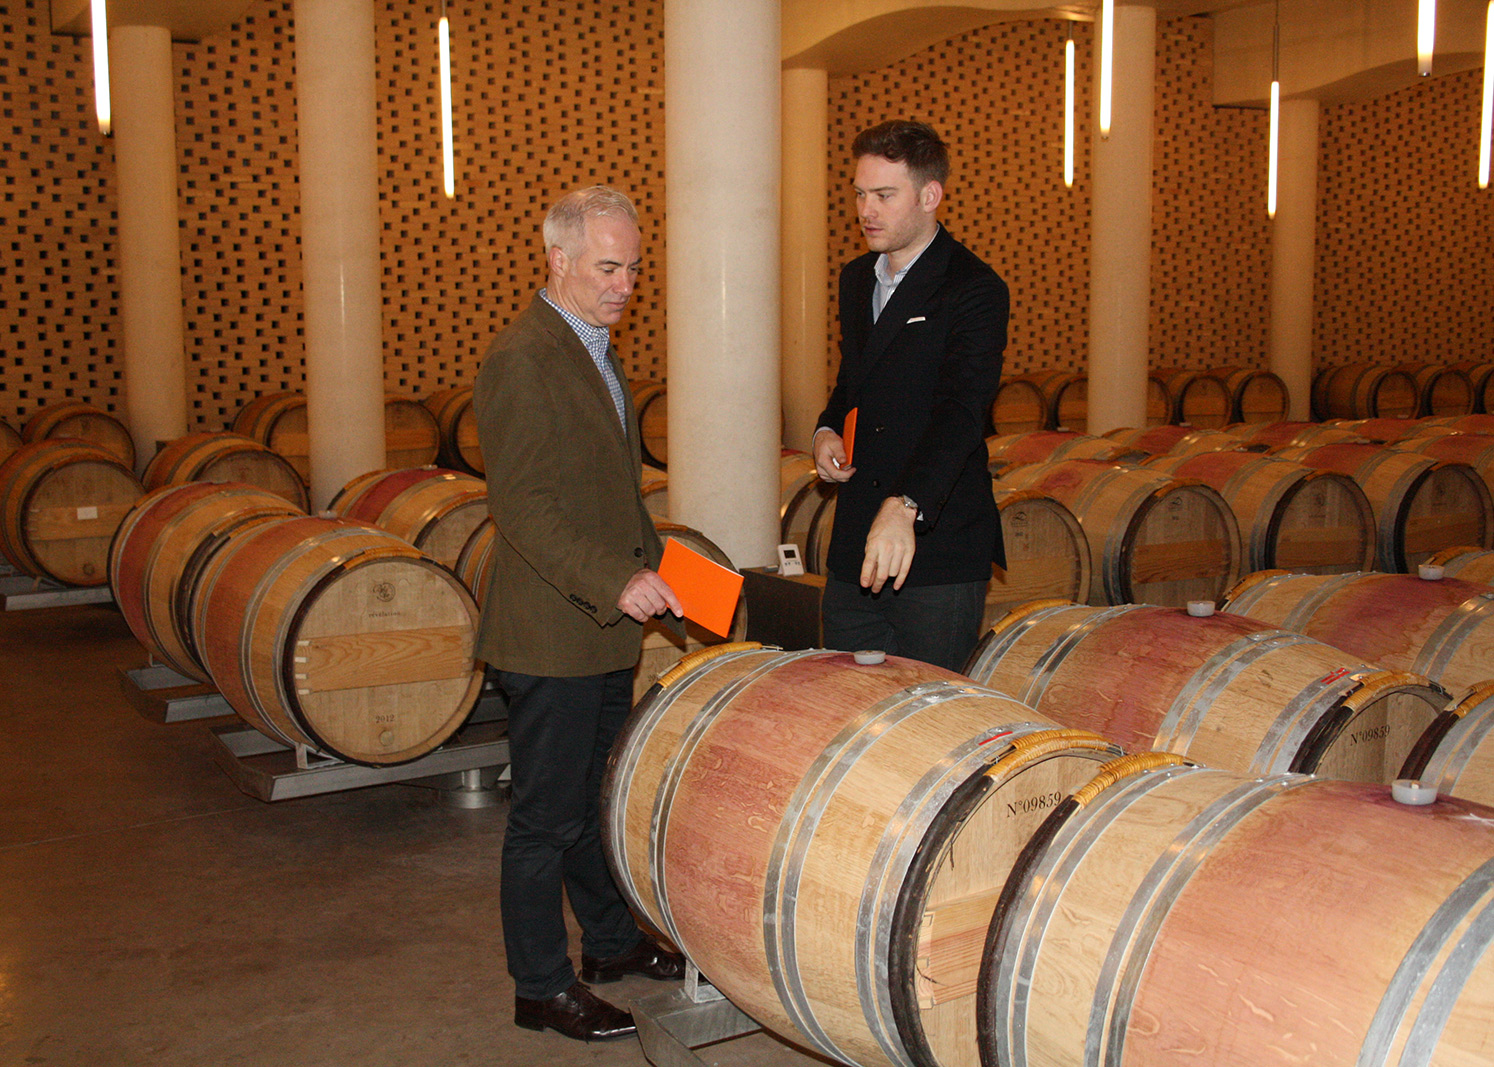 Cult Wines' cofounders Tom and Phil Gearing visiting chateaux for the 2011 Bordeaux EP